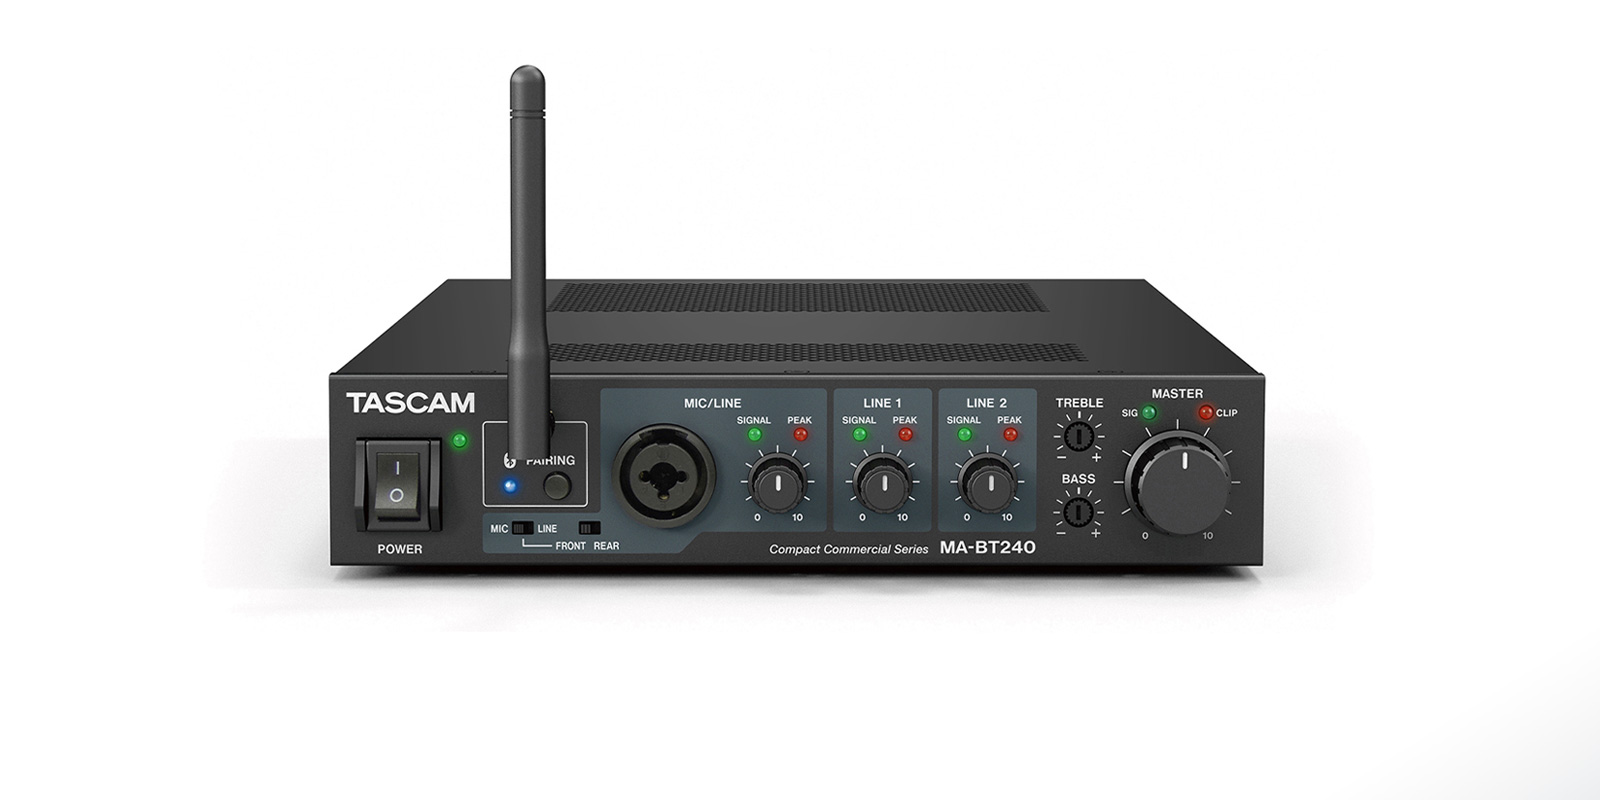 TASCAM Announces the MA-BT240 Multifunctional Mixing Amplifier